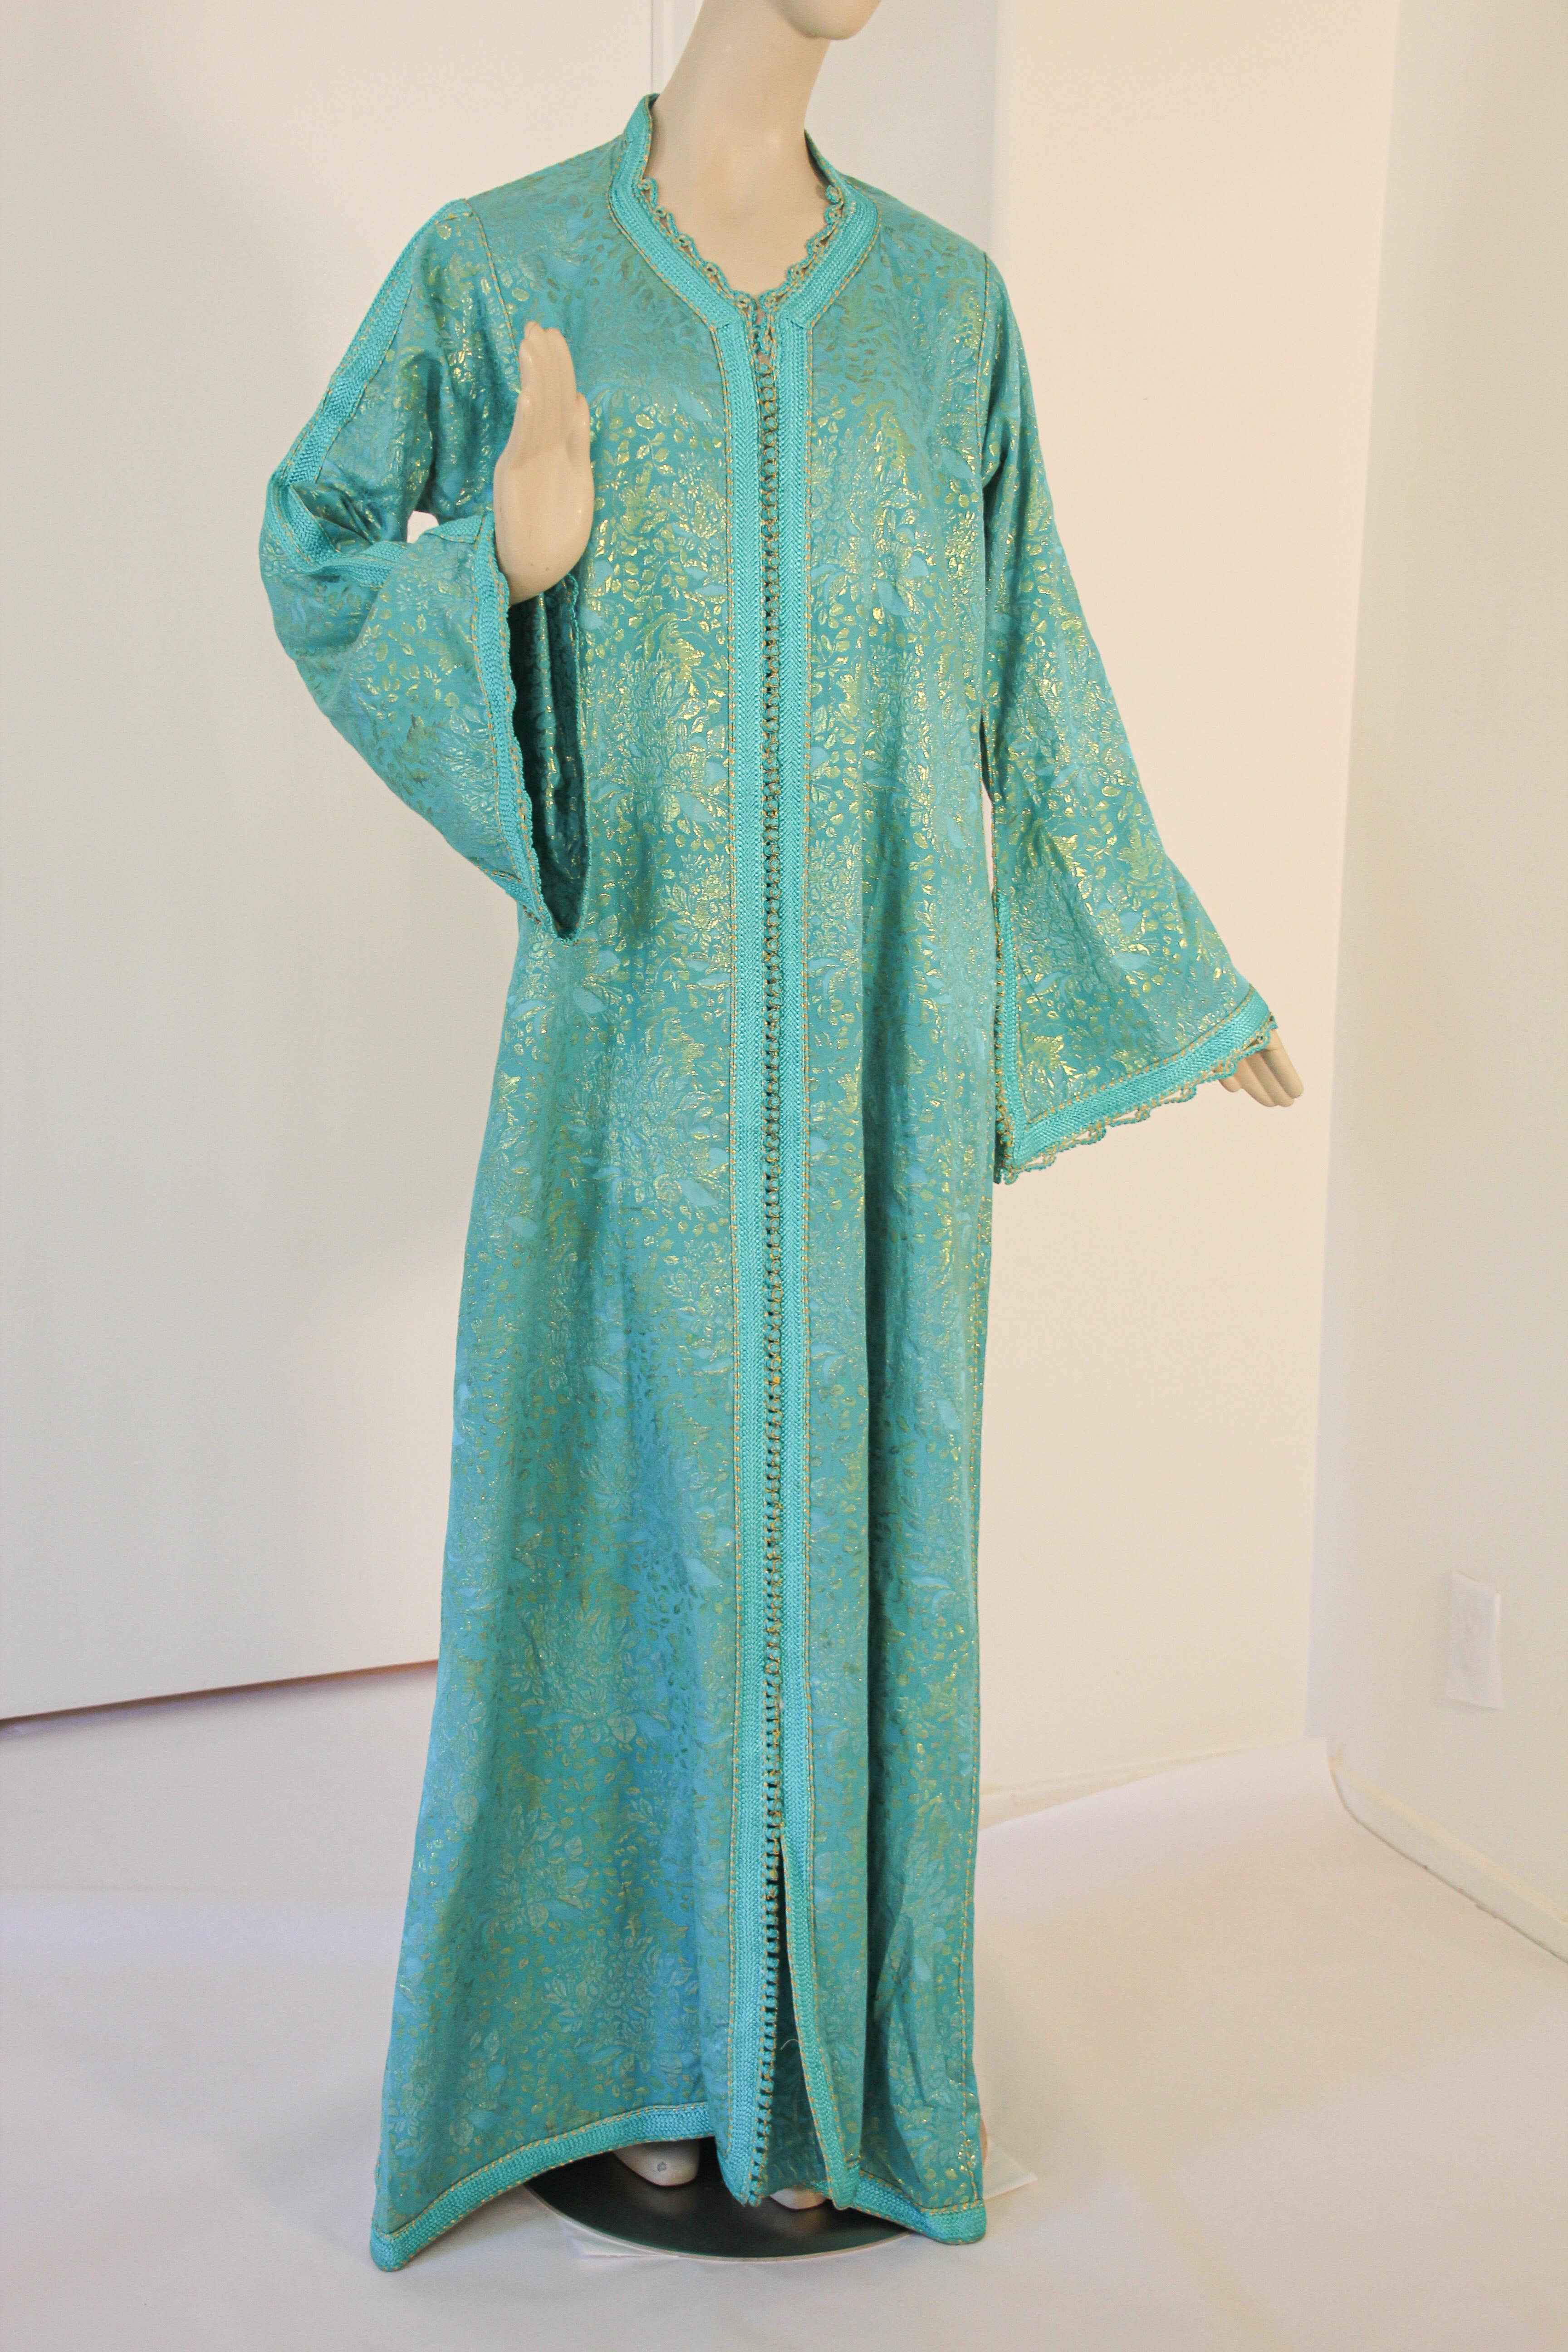 Vintage Moroccan Caftan with Metallic Blue Silk Brocade In Good Condition For Sale In North Hollywood, CA